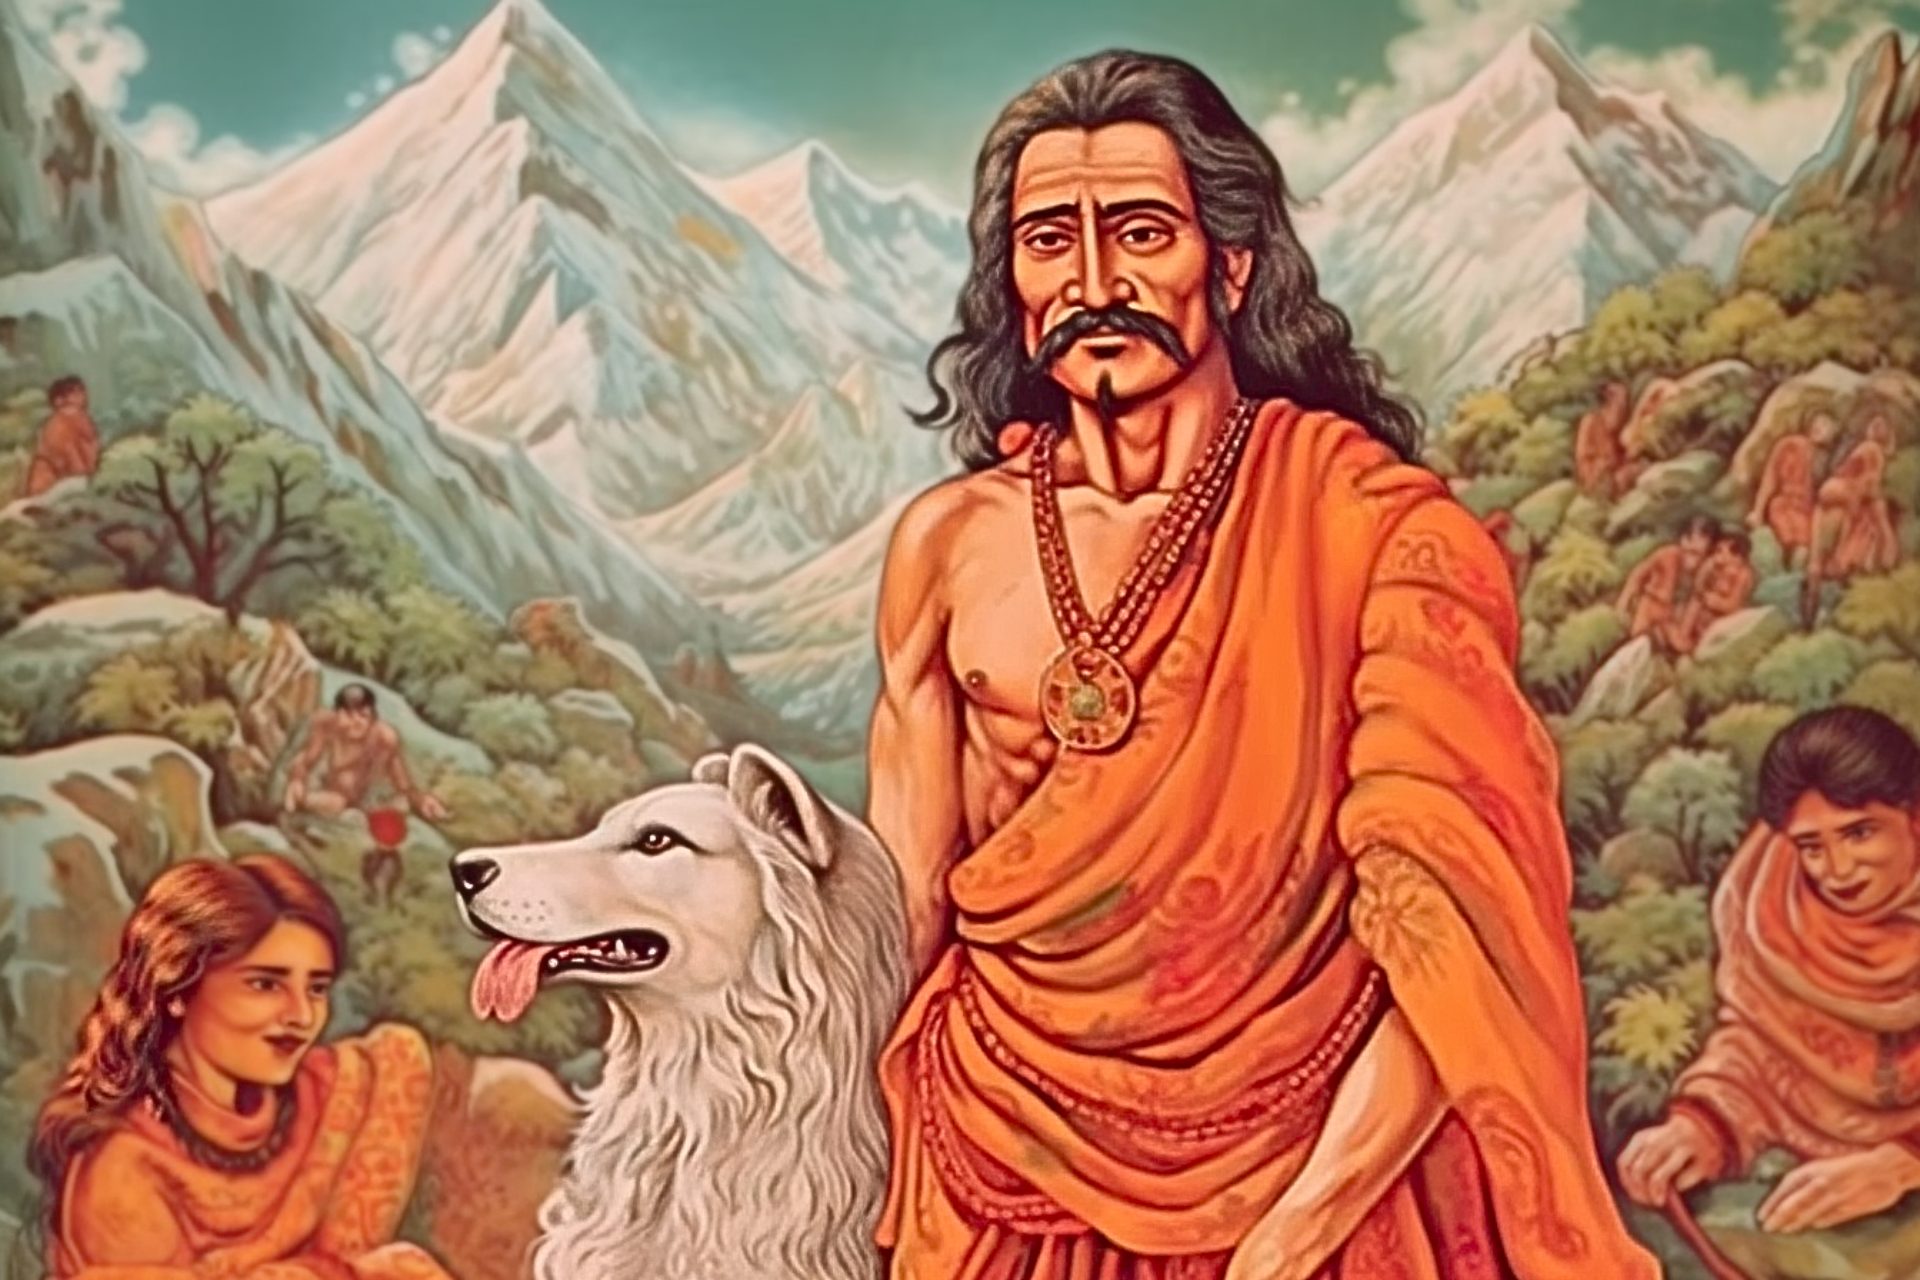 An illustration of Yudhisthira dressed in orange robes and his dog at his side walking in a valley.